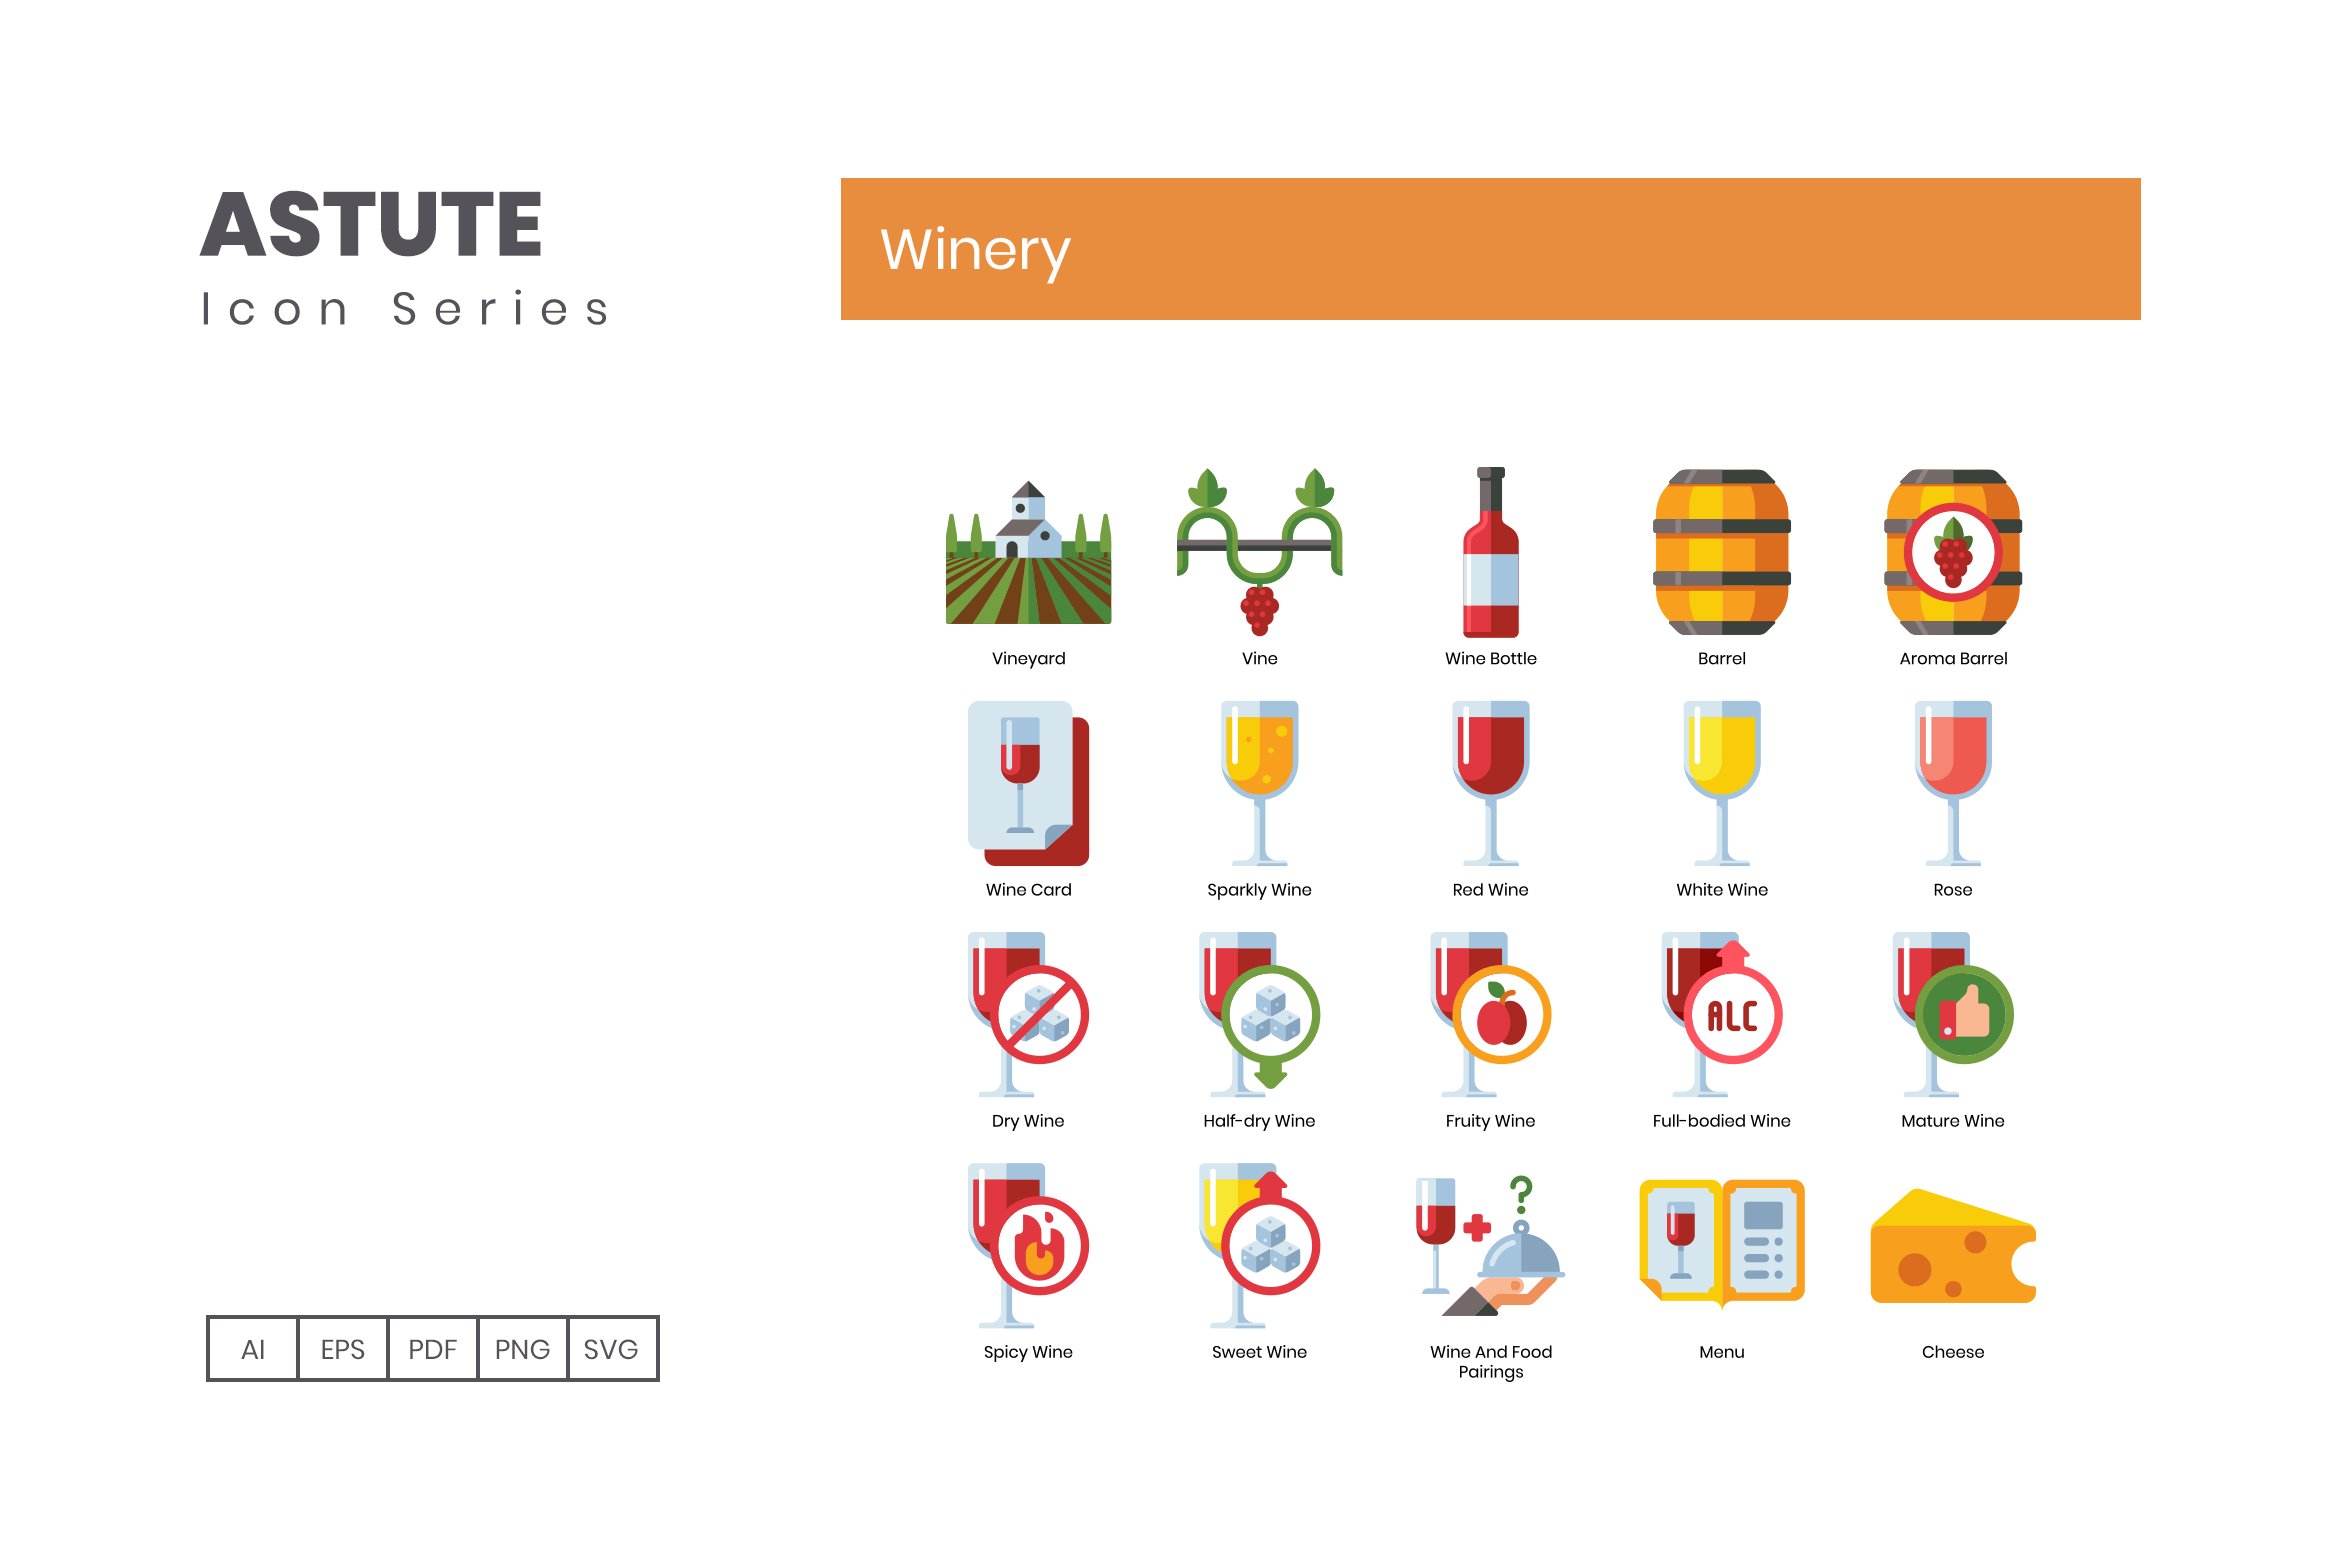 80 Winery Icons - Astute Series preview image.